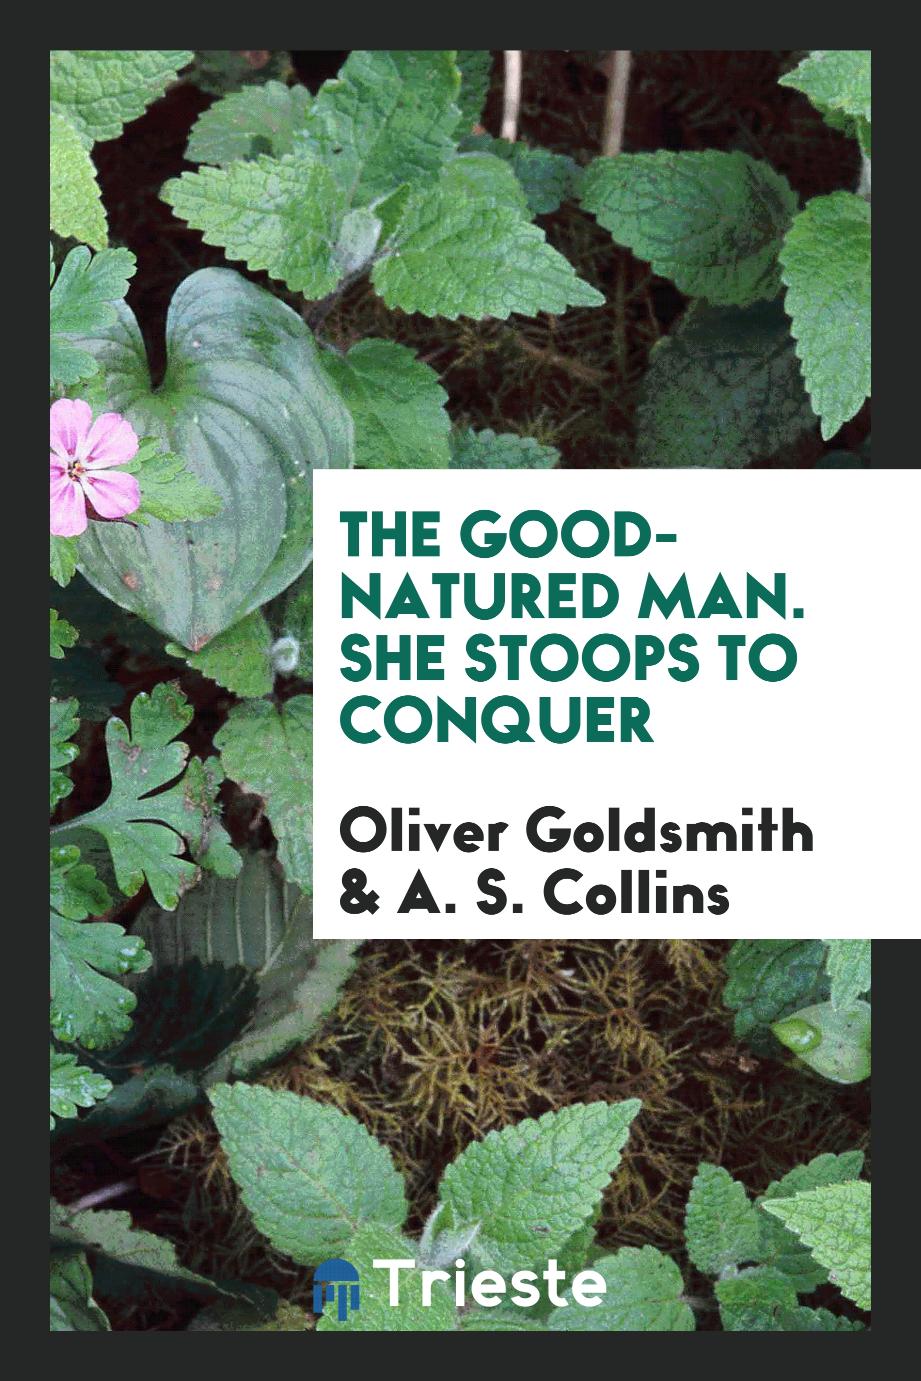 The good-natured man. She stoops to conquer